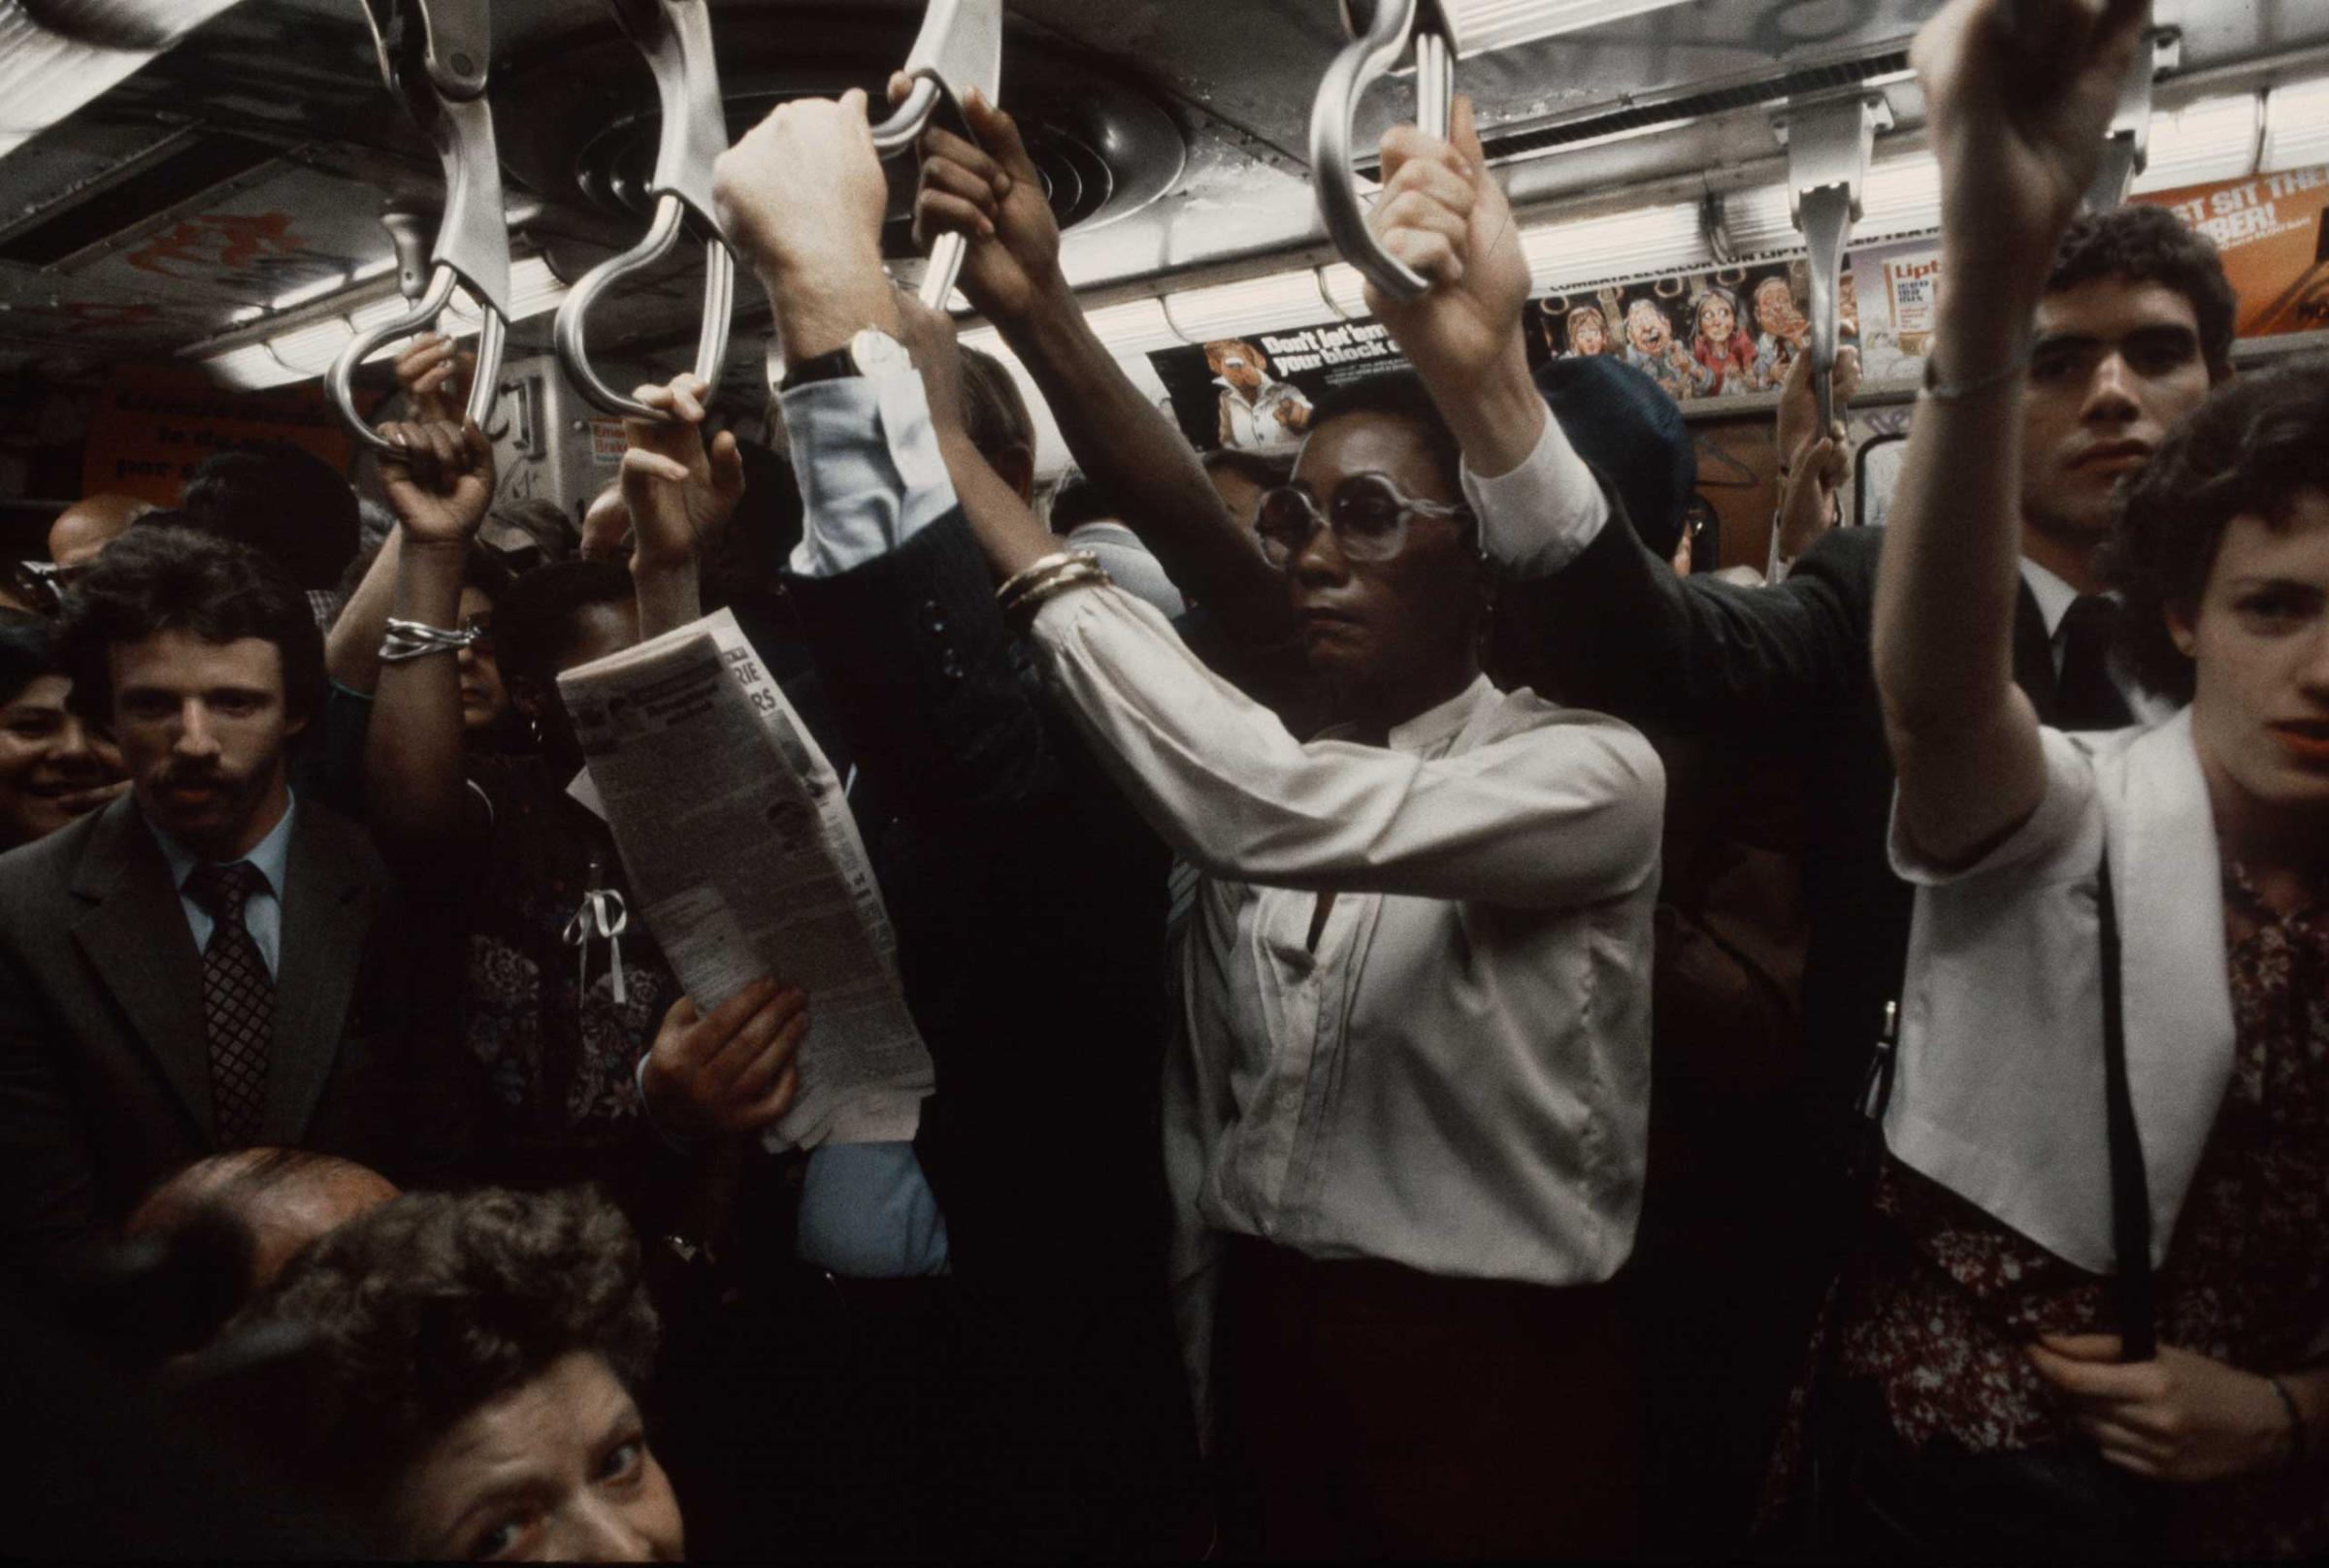 A packed subway car during rush hour, 1981.